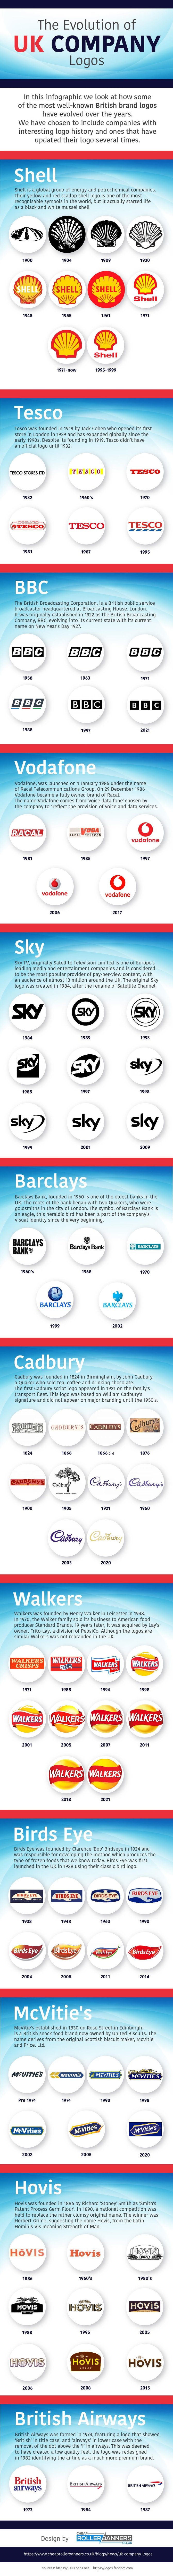 The Evolution Of UK Company Logos - Infographic